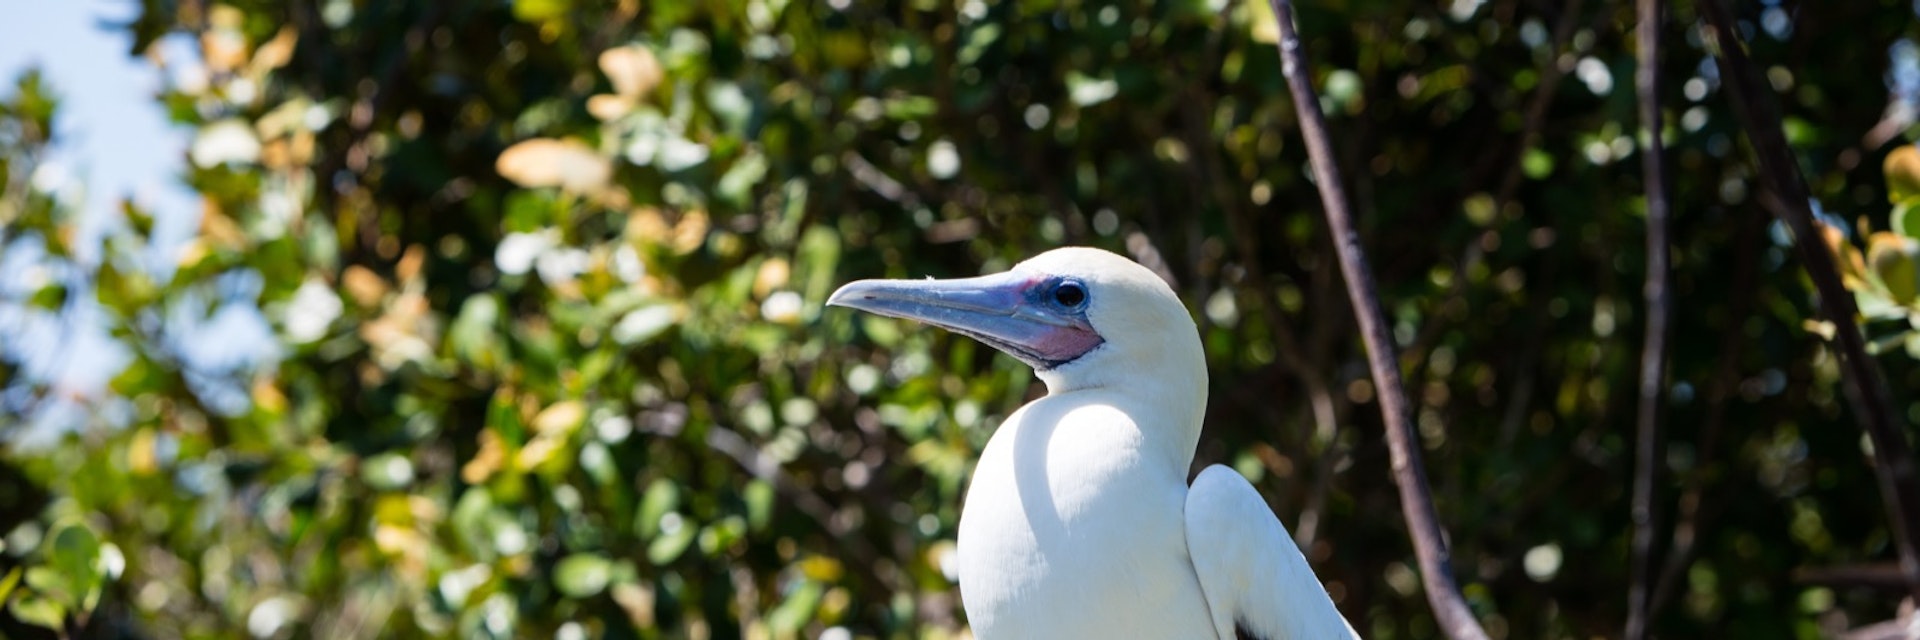 A Red-footed booby (Sula sula) sits on a branch in a breeding colony on Half Moon Caye off the coast of Belize. This is part of a UNESCO World Heritage Site.; Shutterstock ID 583848568; Your name (First / Last): Alicia Johnson; GL account no.: 65050; Netsuite department name: Online Editorial ; Full Product or Project name including edition: Belize